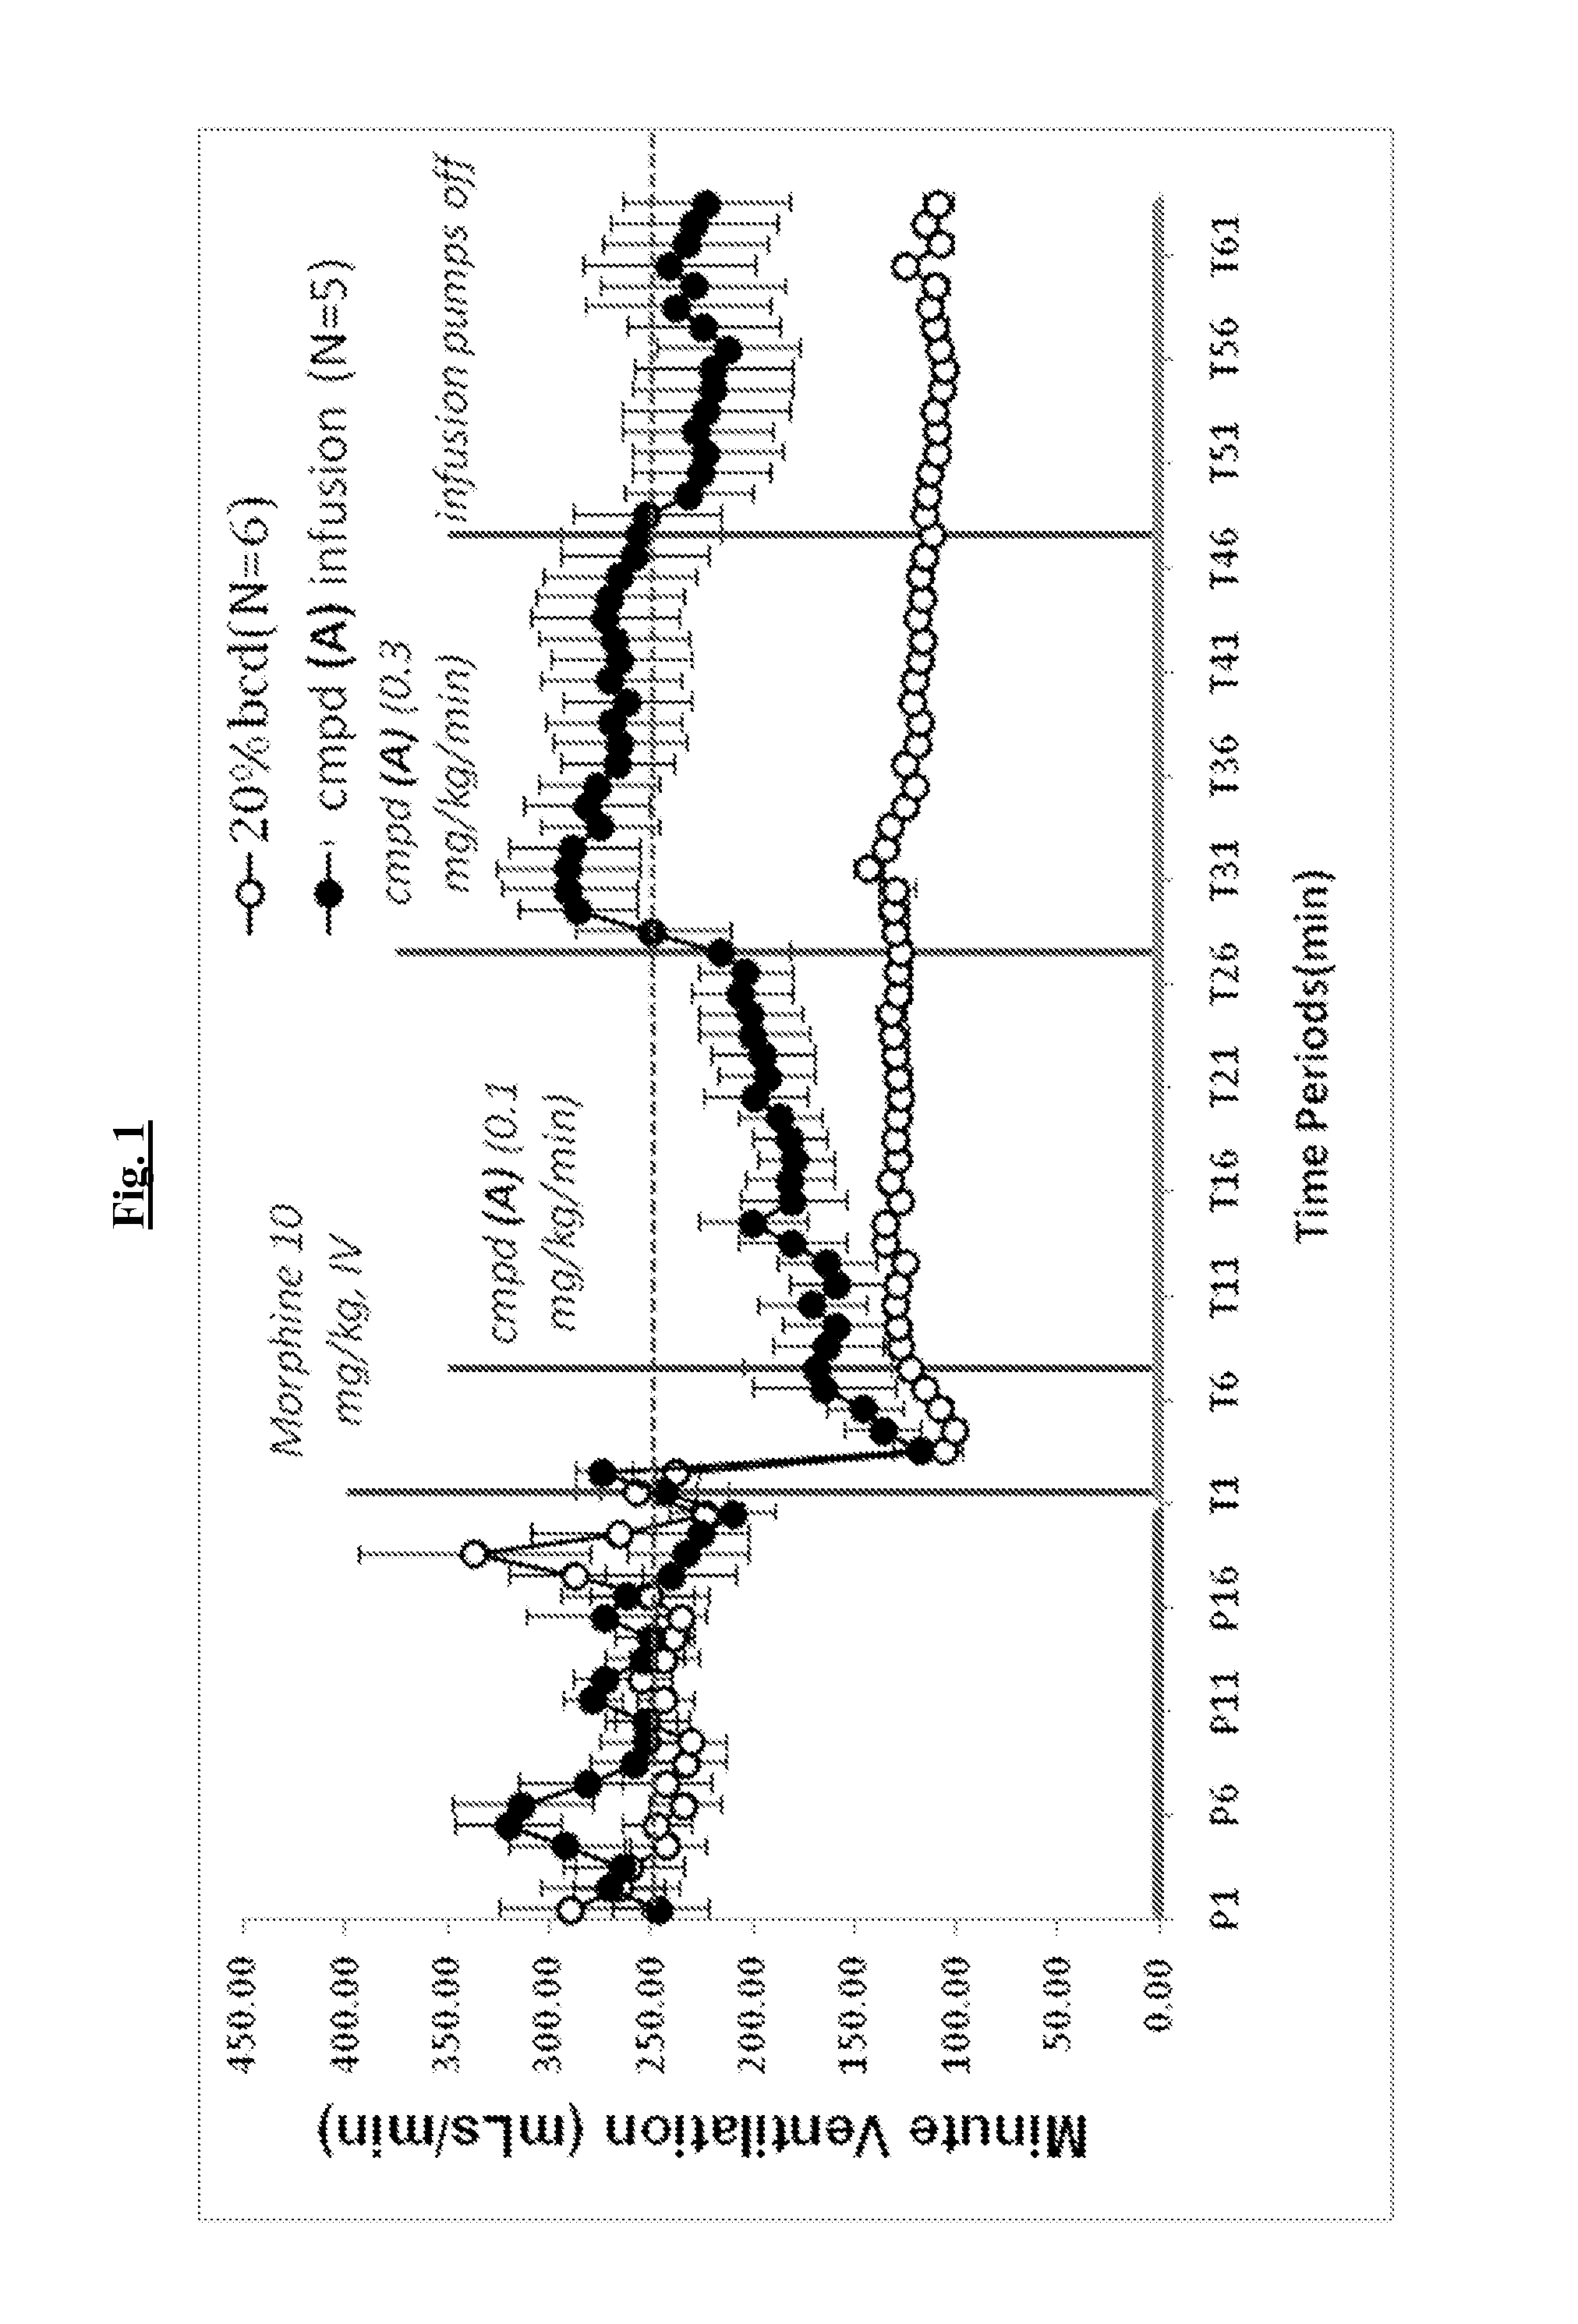 Novel compounds and compositions for treatment of breathing control disorders or diseases